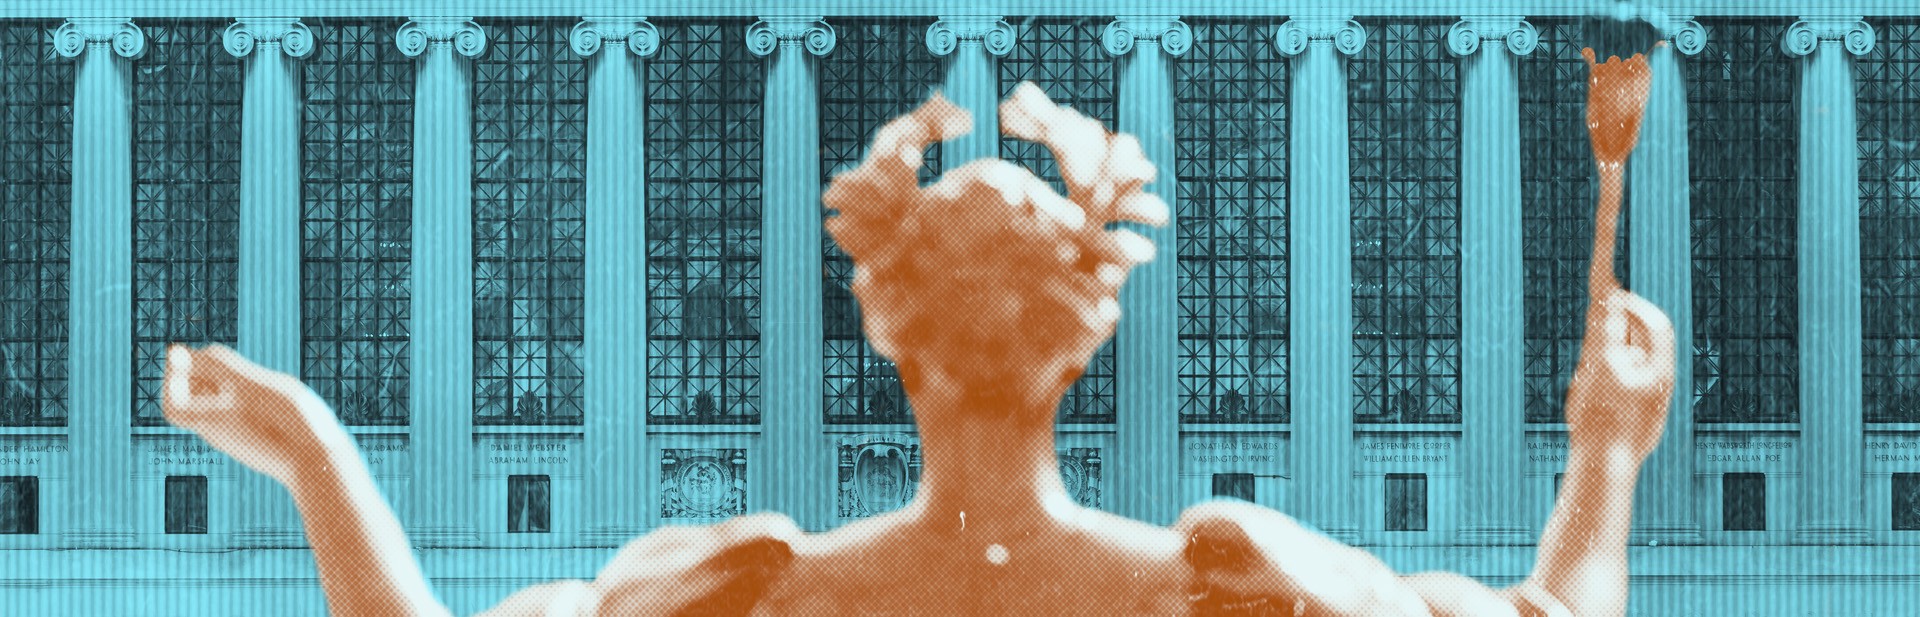 Stylized image of Alma Mater statue seen from behind with Butler Library in the background.